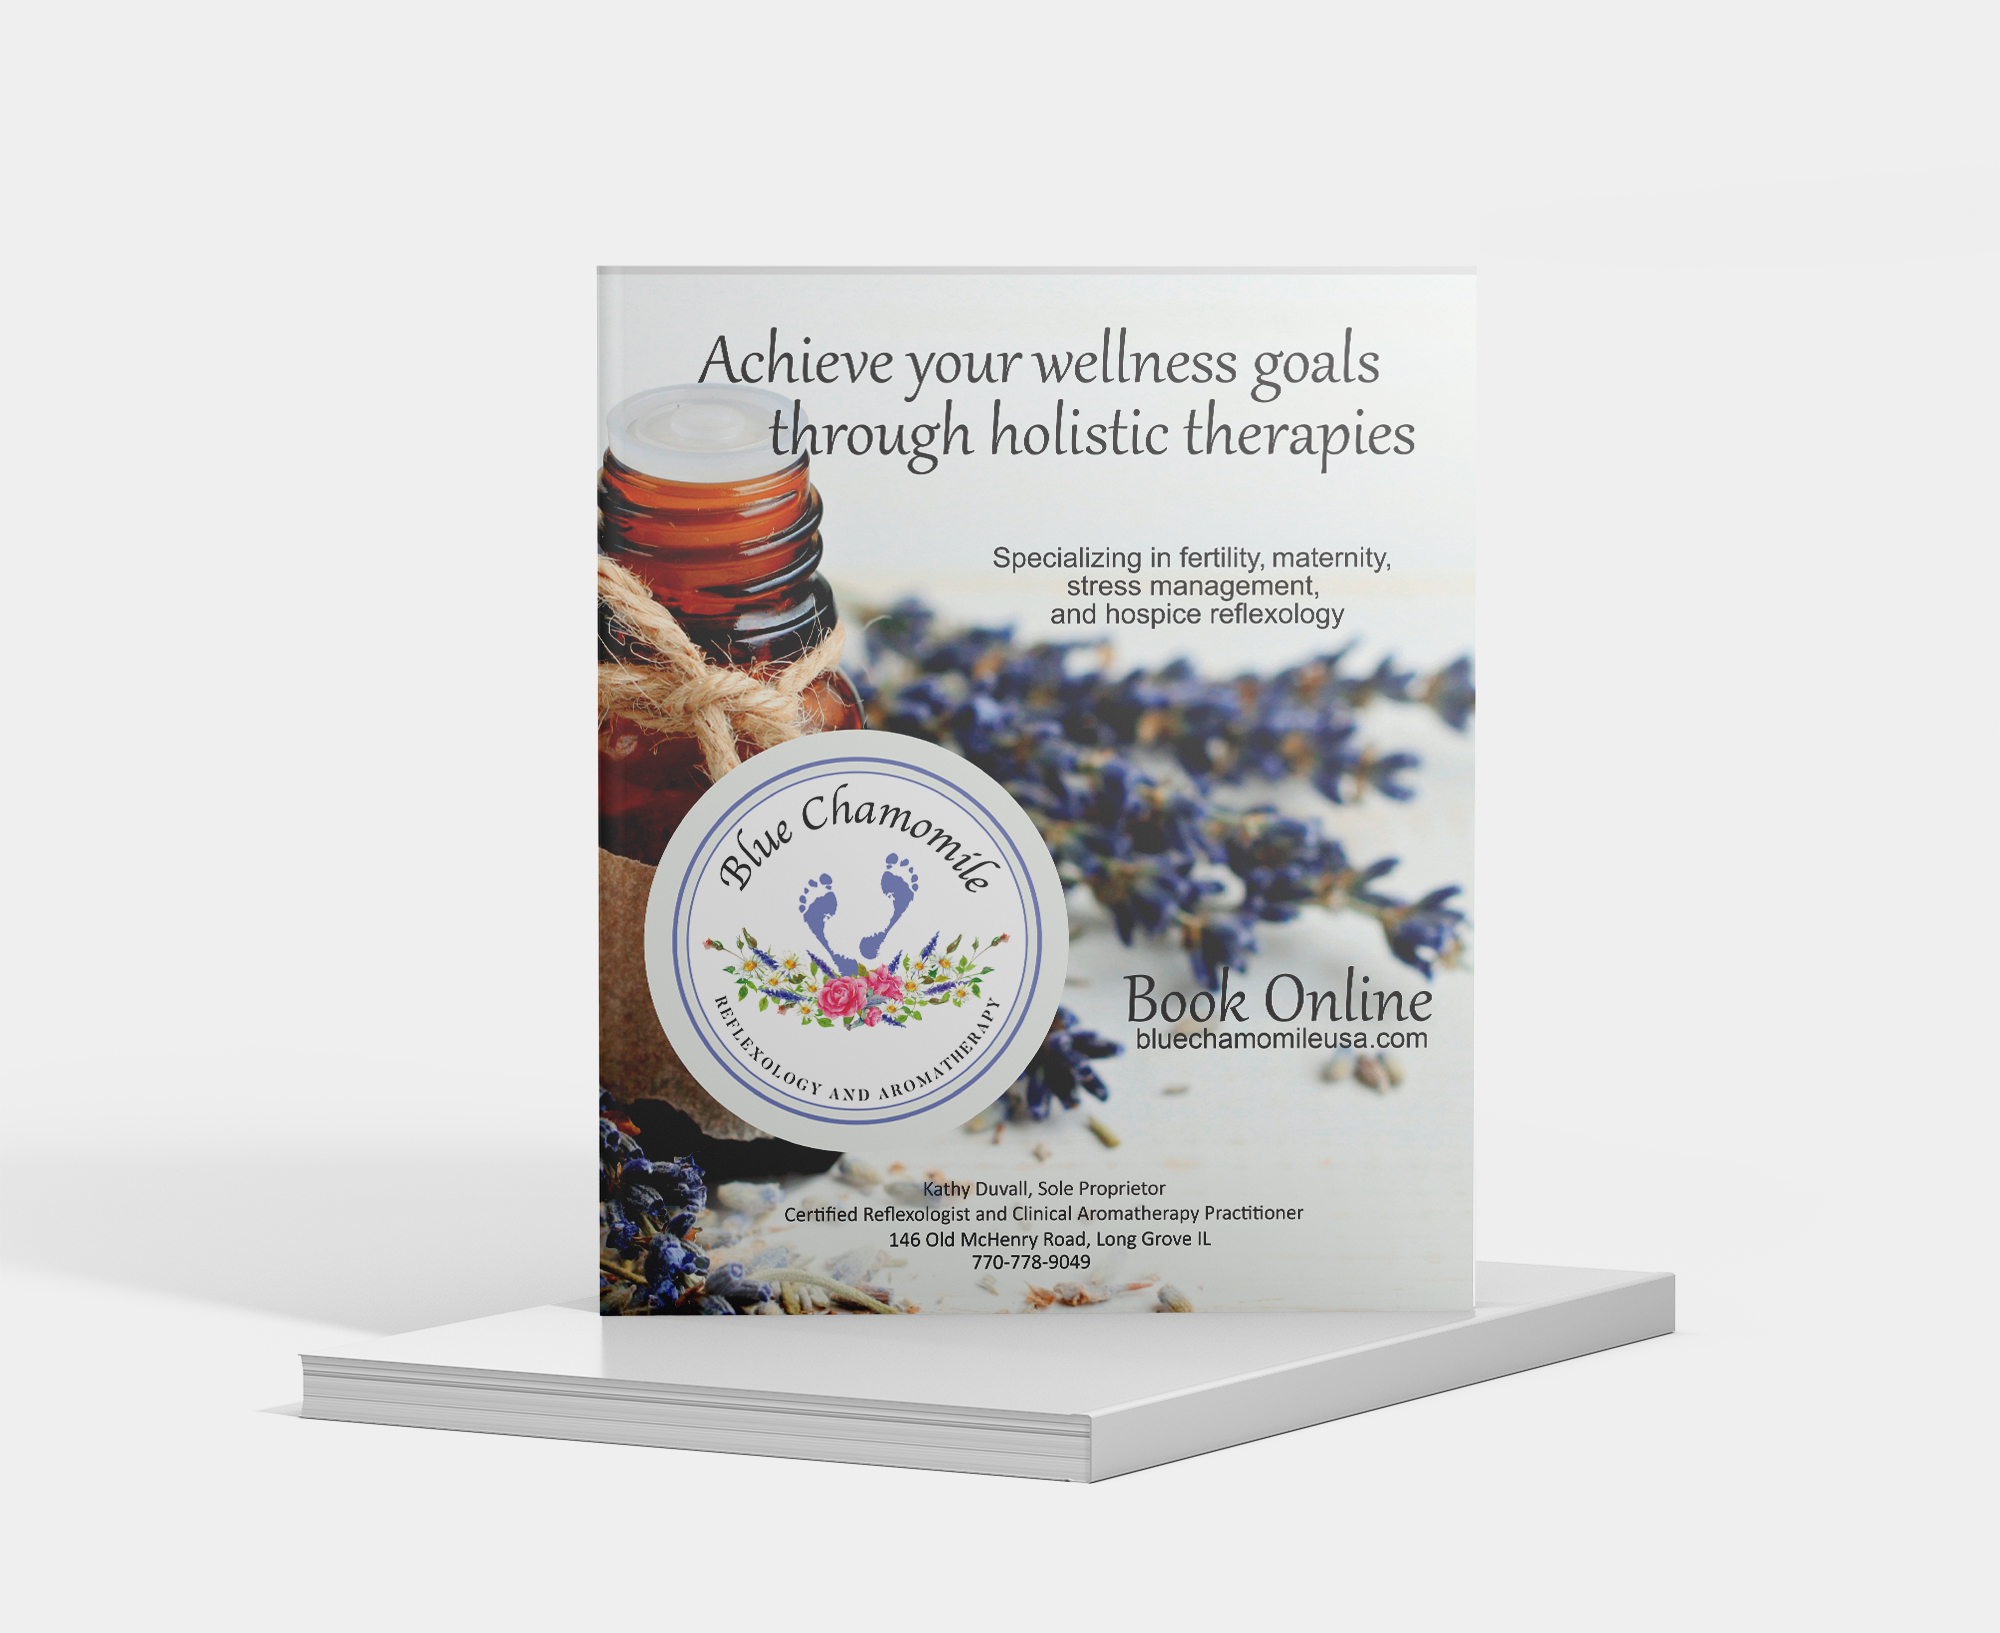 This advertisement was created in Adobe Illustrator for client Blue Chamomile. This ad was used on postcards, various mailings, and printed in their local health and wellness magazine.